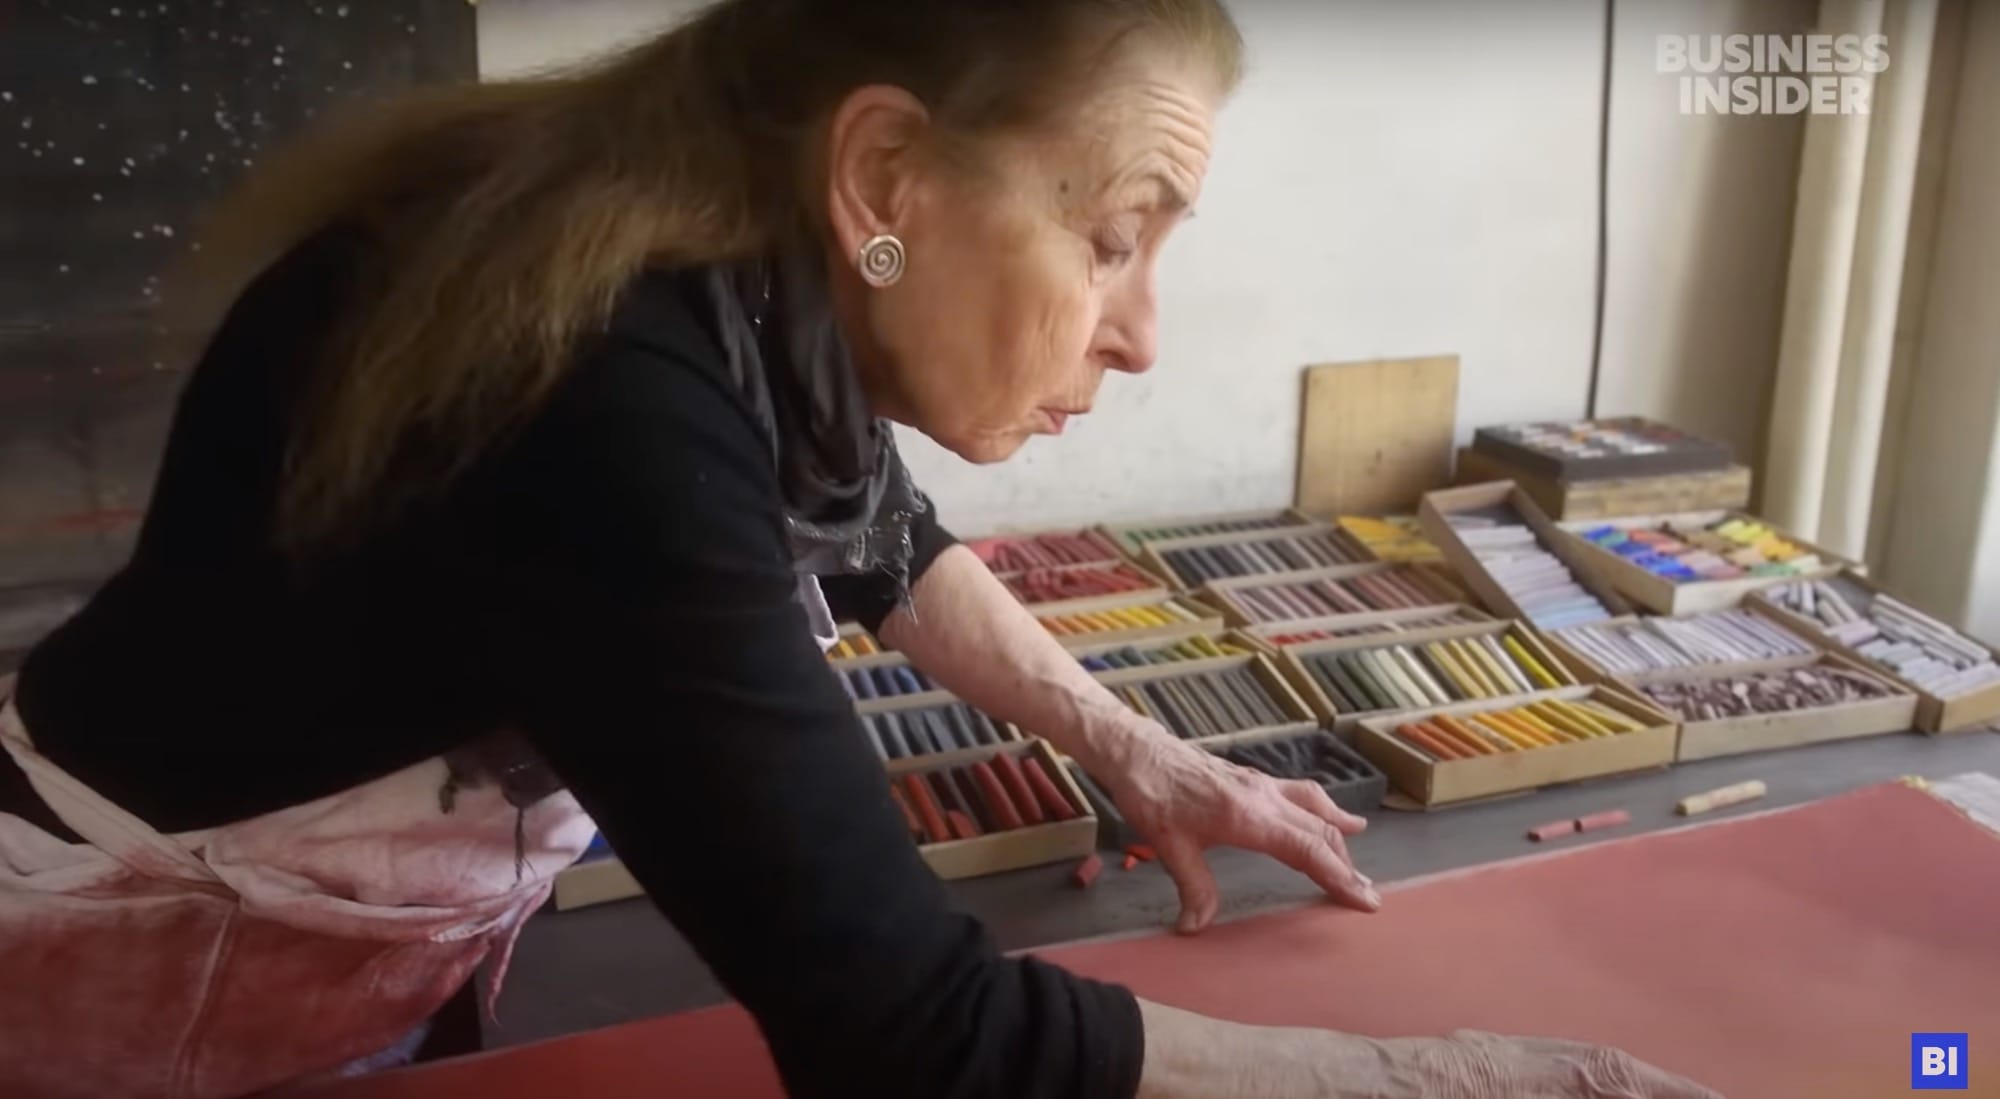 a still from a short documentary about a pastel maker, showing an artist working on a drawing with boxes of pastels in the background